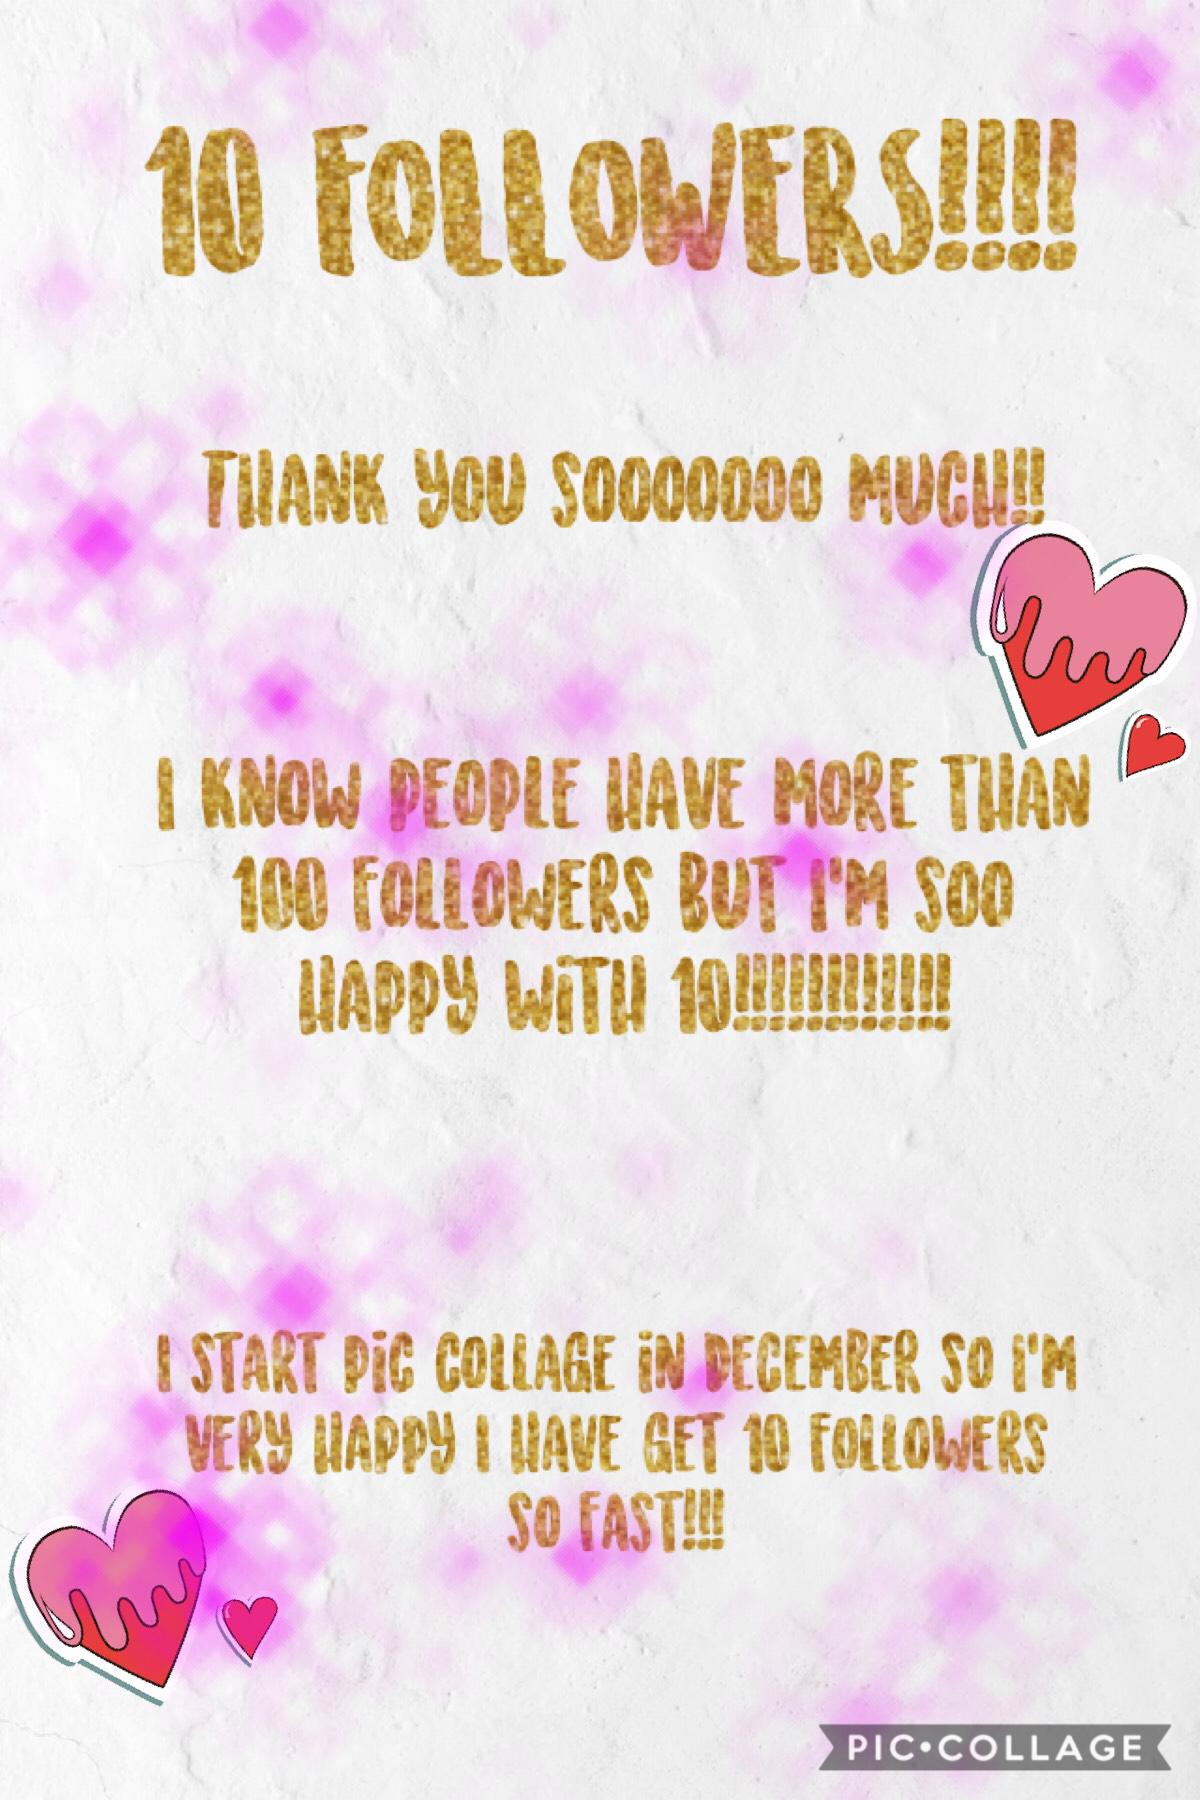 10 followers! (Click)
❤️❤️❤️❤️❤️❤️❤️❤️❤️❤️❤️❤️❤️❤️❤️❤️❤️❤️

THANK YOU SO SO MUCH!
I’M SO HAPPY!!!!!
❤️❤️❤️❤️❤️❤️❤️❤️❤️❤️❤️❤️❤️❤️❤️❤️❤️❤️

Like,comment,share and follow me!!